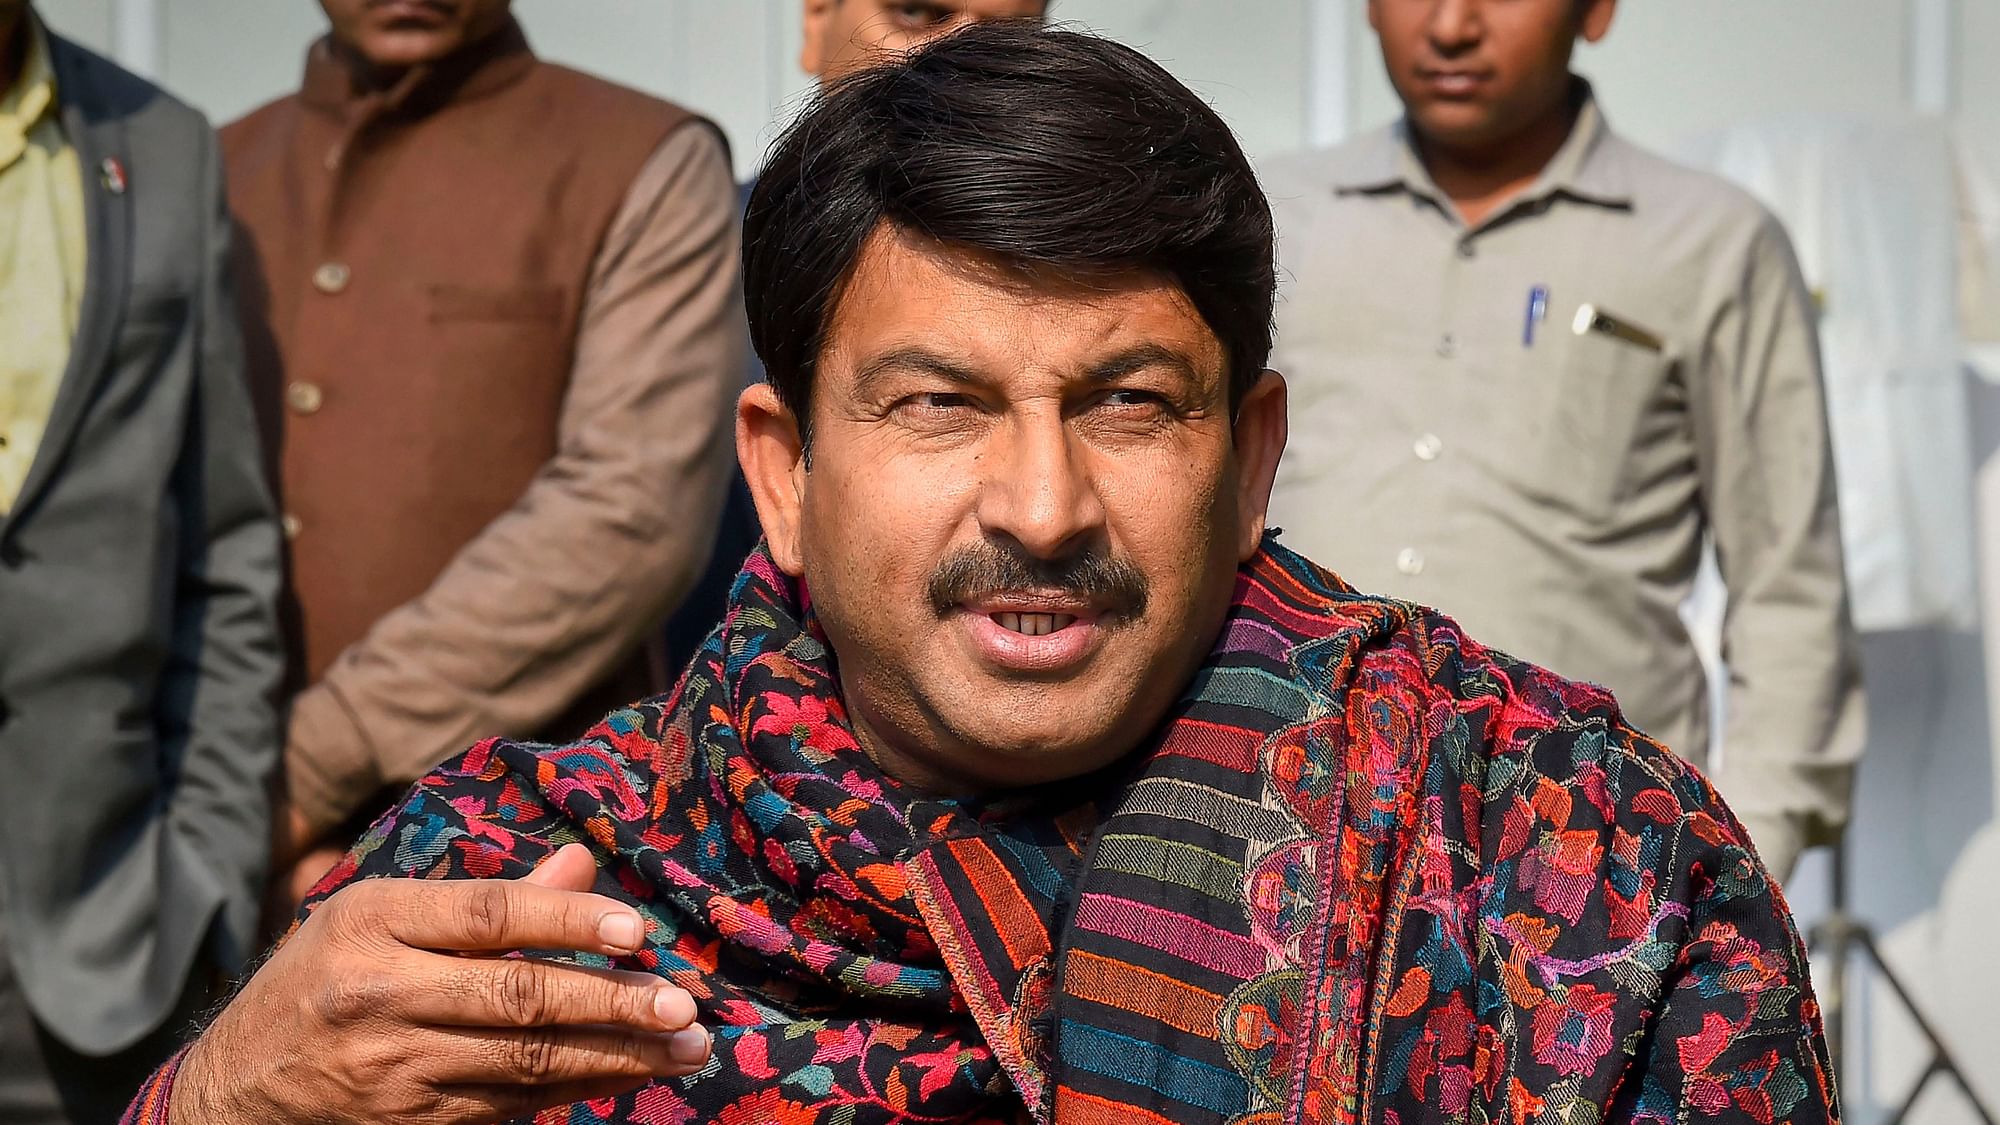 Delhi BJP Chief Manoj Tiwari speaks to the media at his residence as counting of votes for Delhi Assembly election begins.